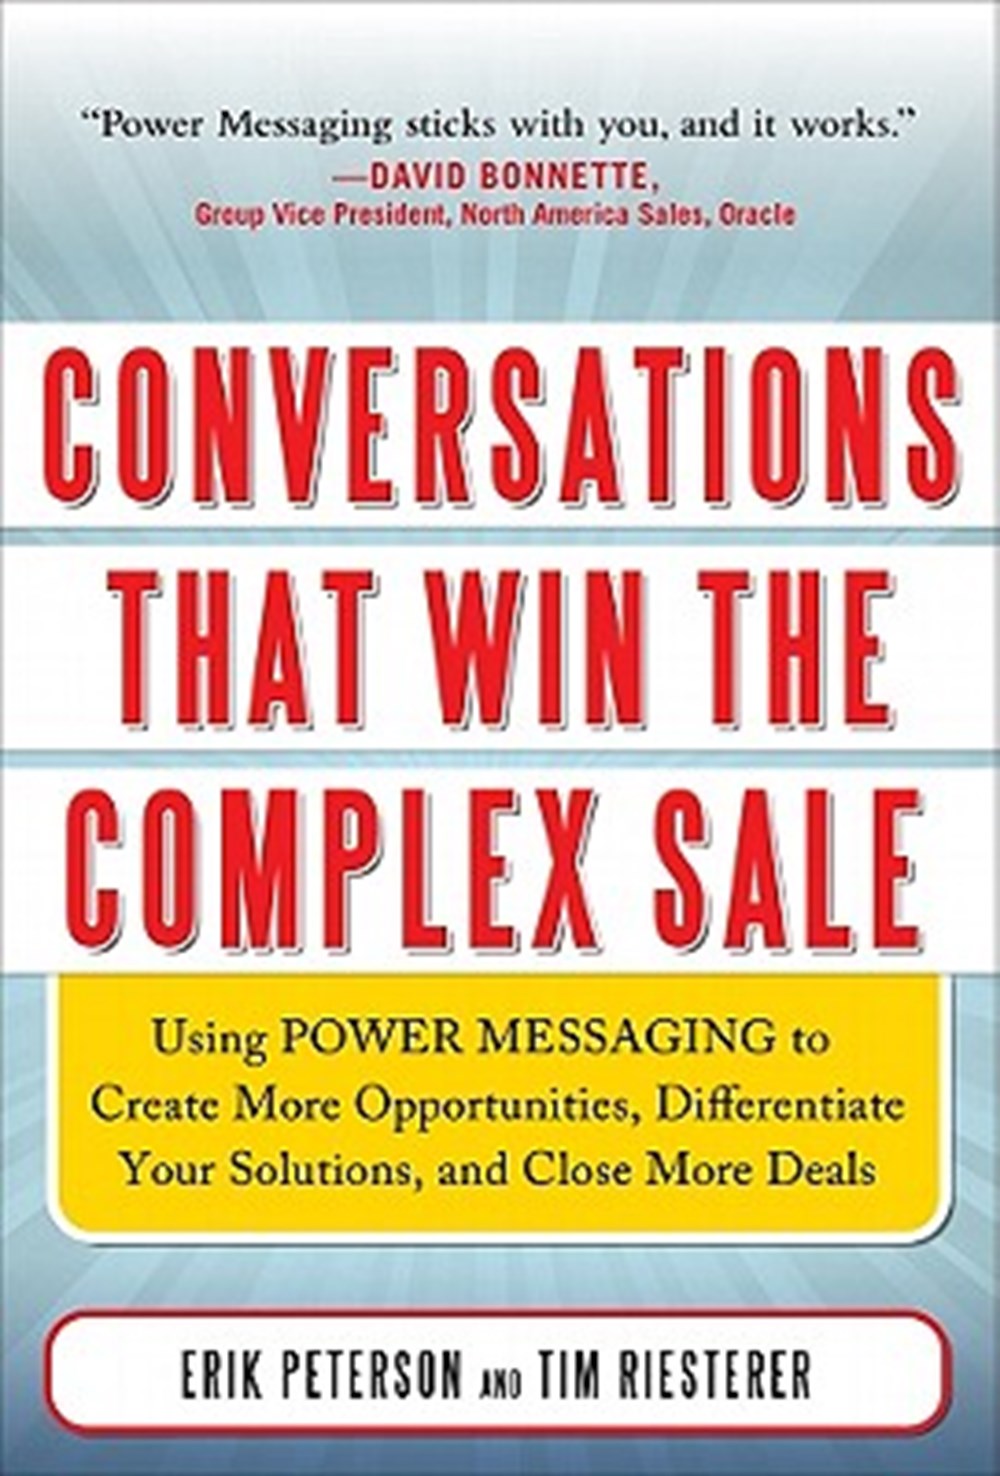 Conversations That Win the Complex Sale Using Power Messaging to Create More Opportunities, Differen